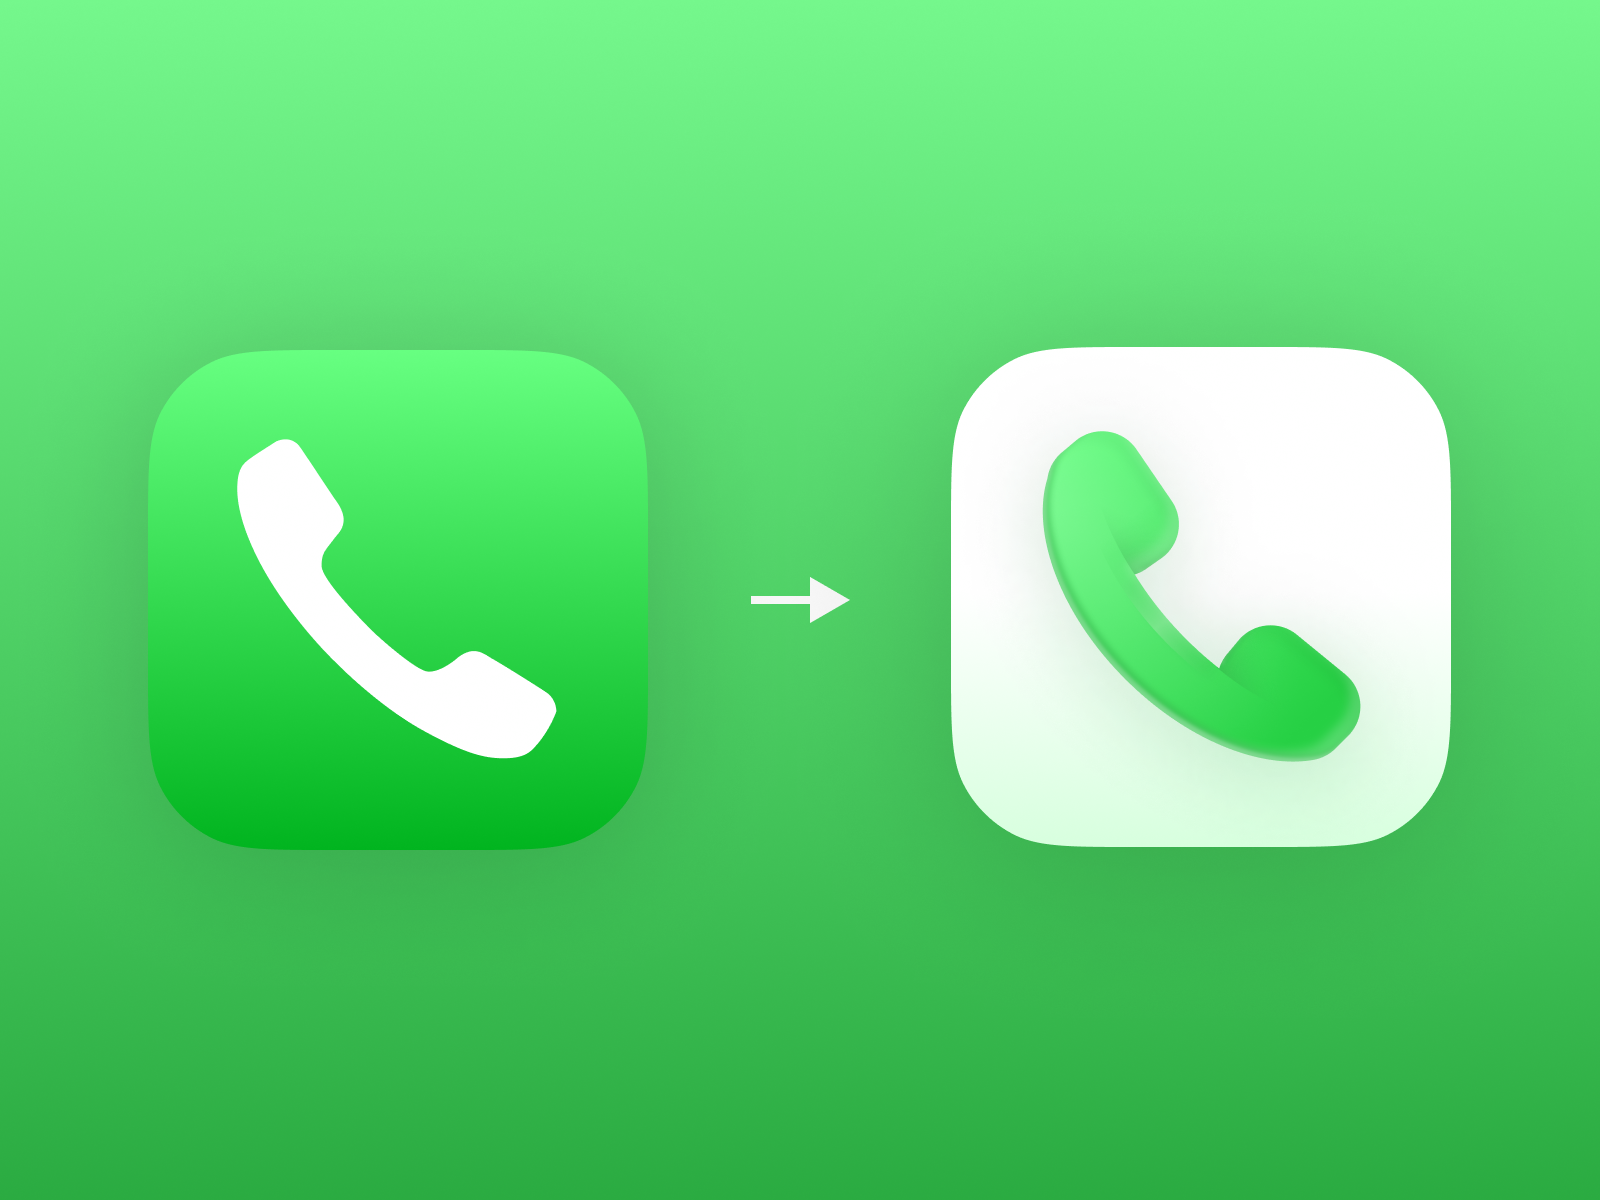 Phone - App icon redesign concept #30 by Eddy on Dribbble